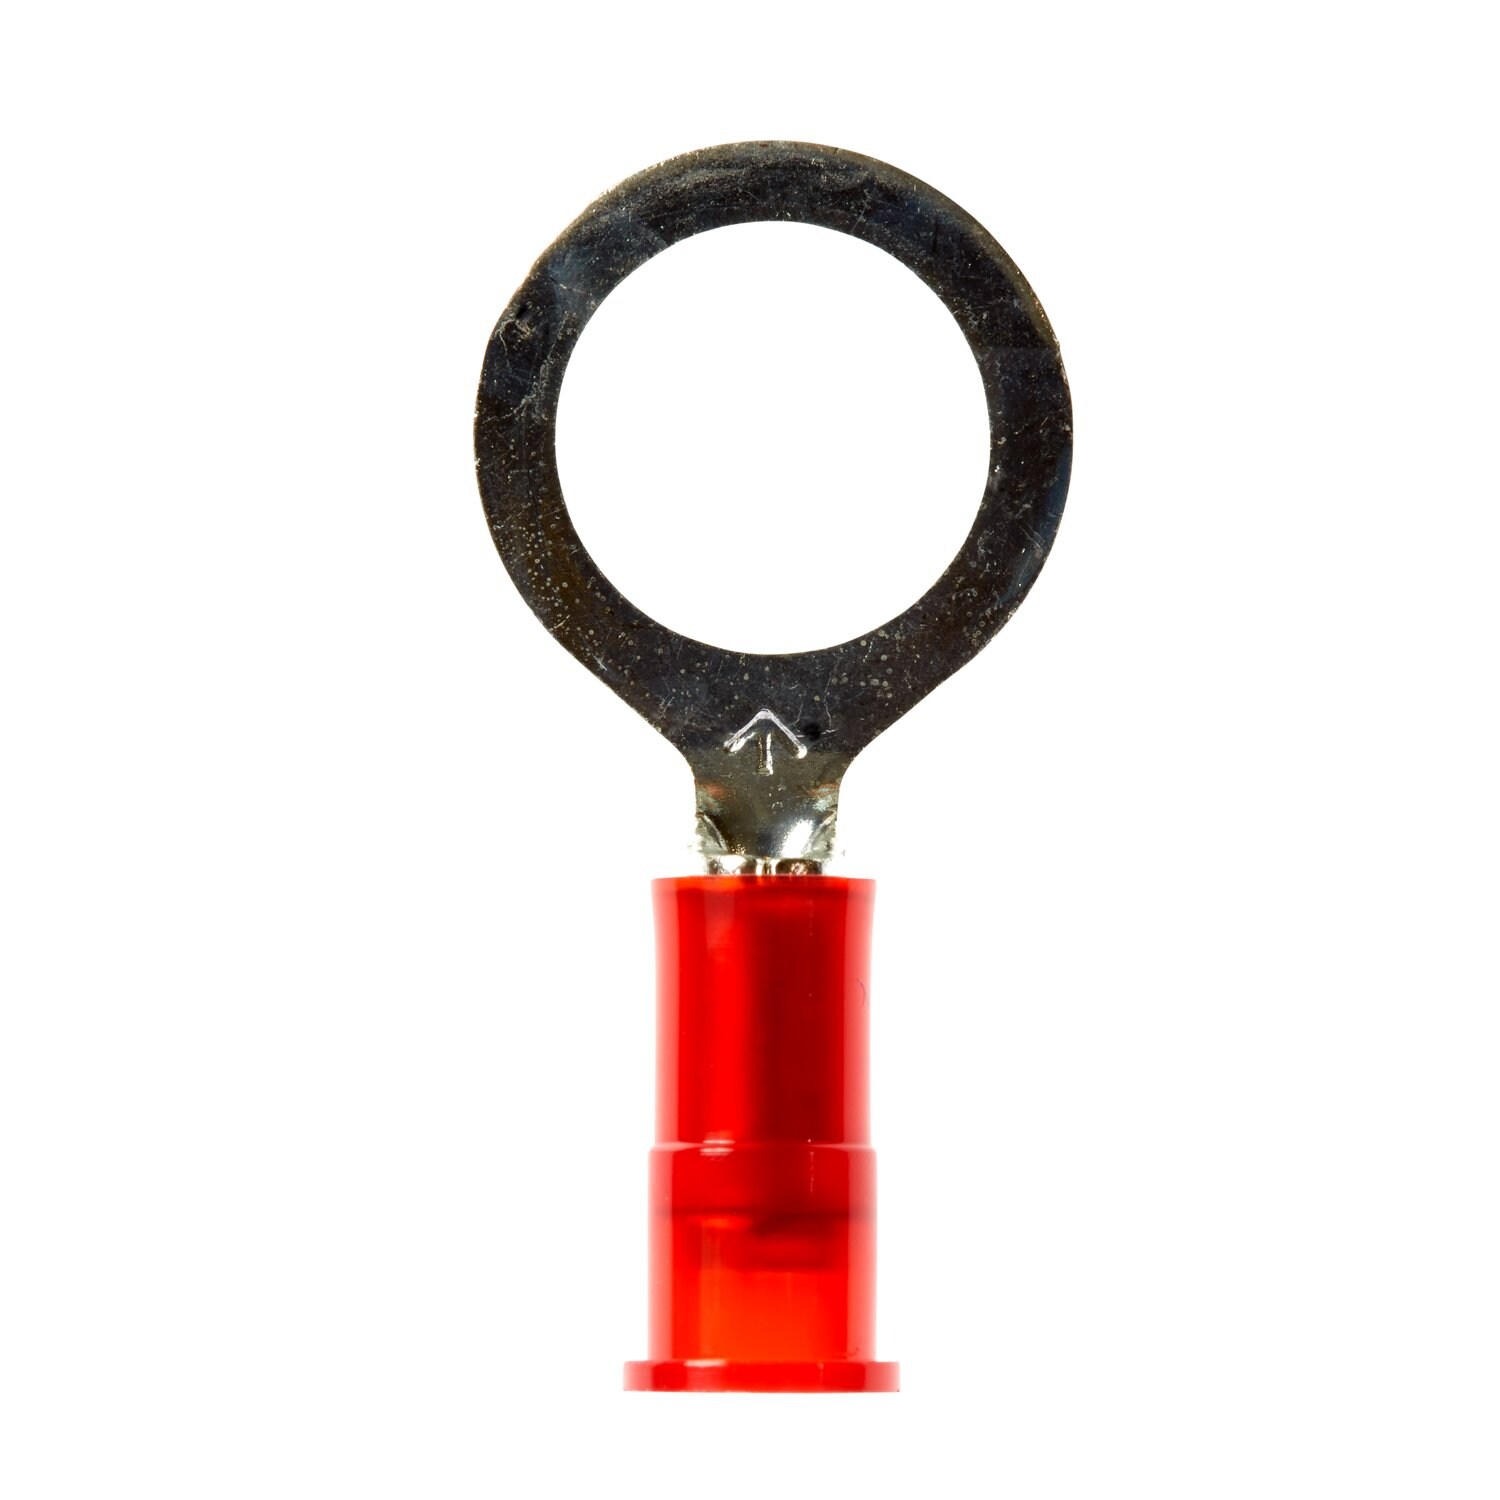 7100163931 - 3M Scotchlok Ring Tongue, Nylon Insulated w/Insulation Grip
MNG18-38RK, Stud Size 3/8, 1000/Case